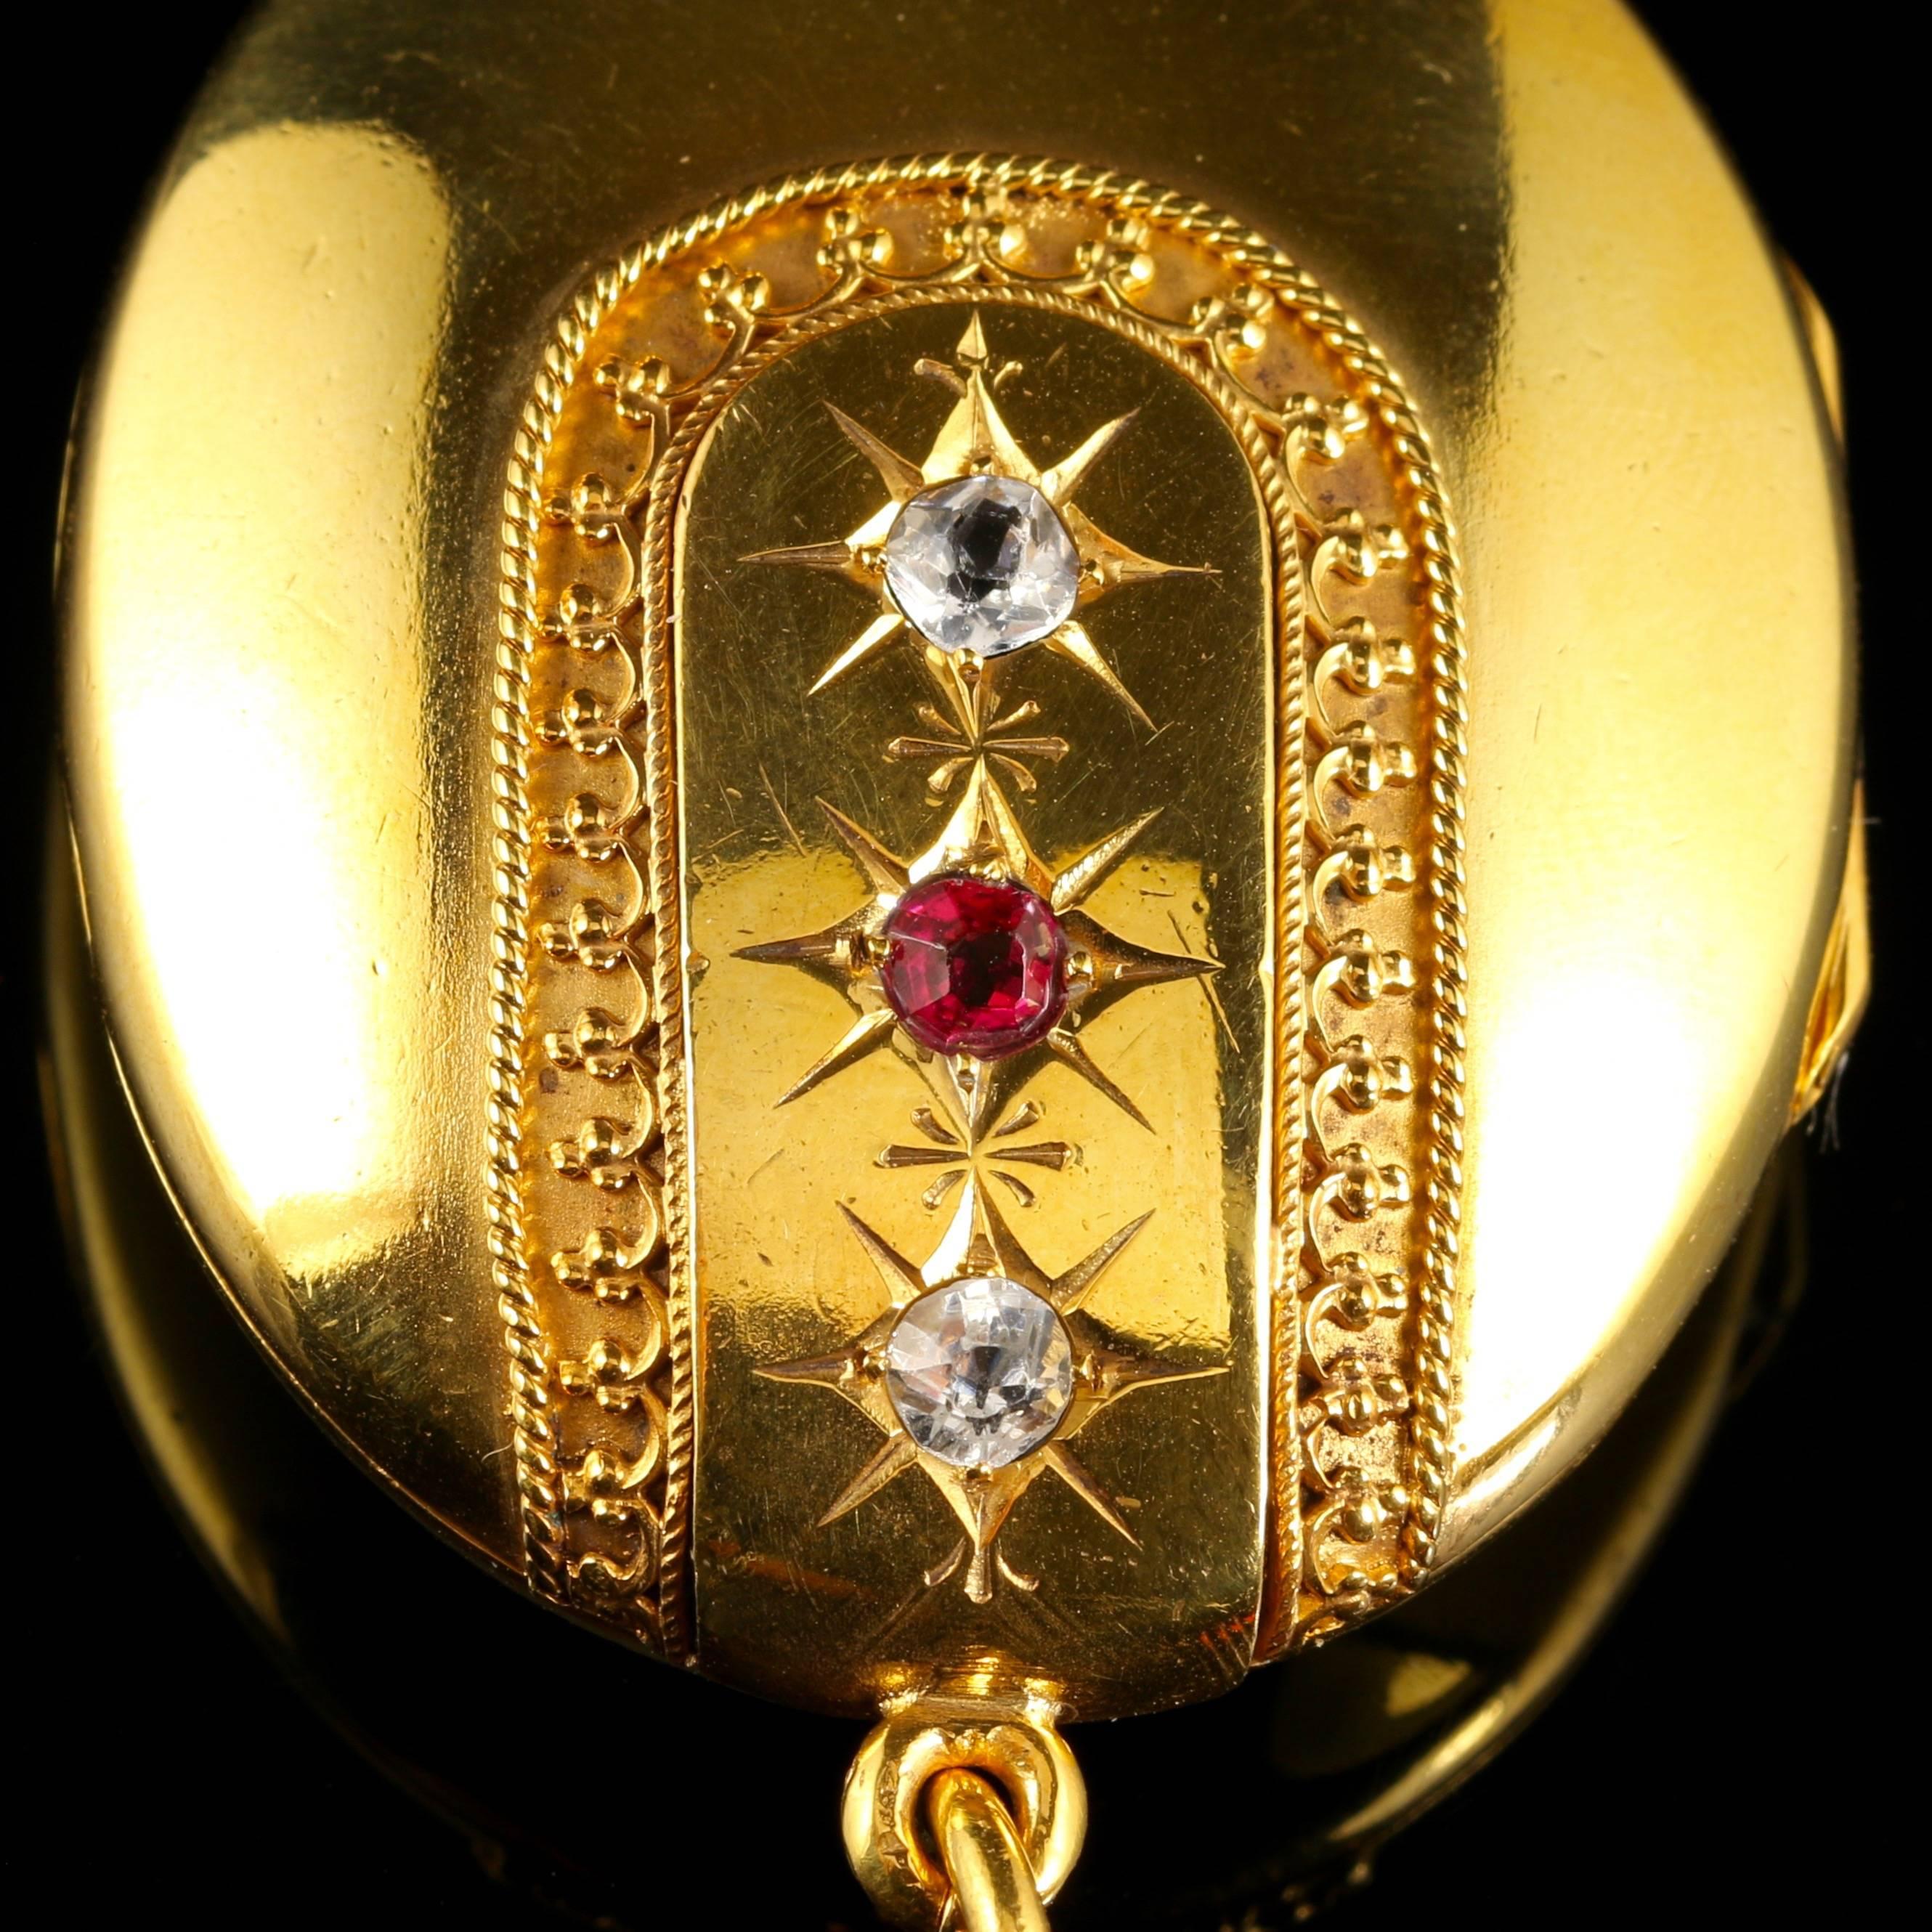 This fabulous Antique Victorian large 18ct gilt locket is Circa 1900.

This lovely locket is set with three Paste Stones down the central gallery bordering cannetille workmanship complimented with a rope twist finish.

Paste is a heavy, very